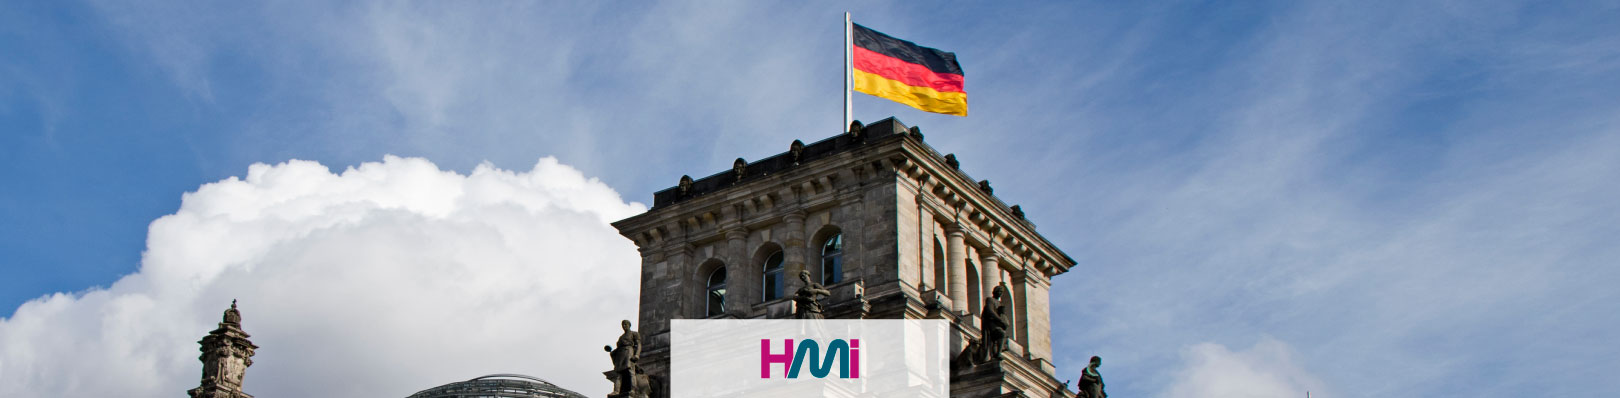 Cities of Germany Page_Banner on hmi-ad.com | HMi offers promotional gift items in Germany since 2018 | Giveaways and swags in Germany with HMi | hmi-ad printing company in Germany with over 35 years experience